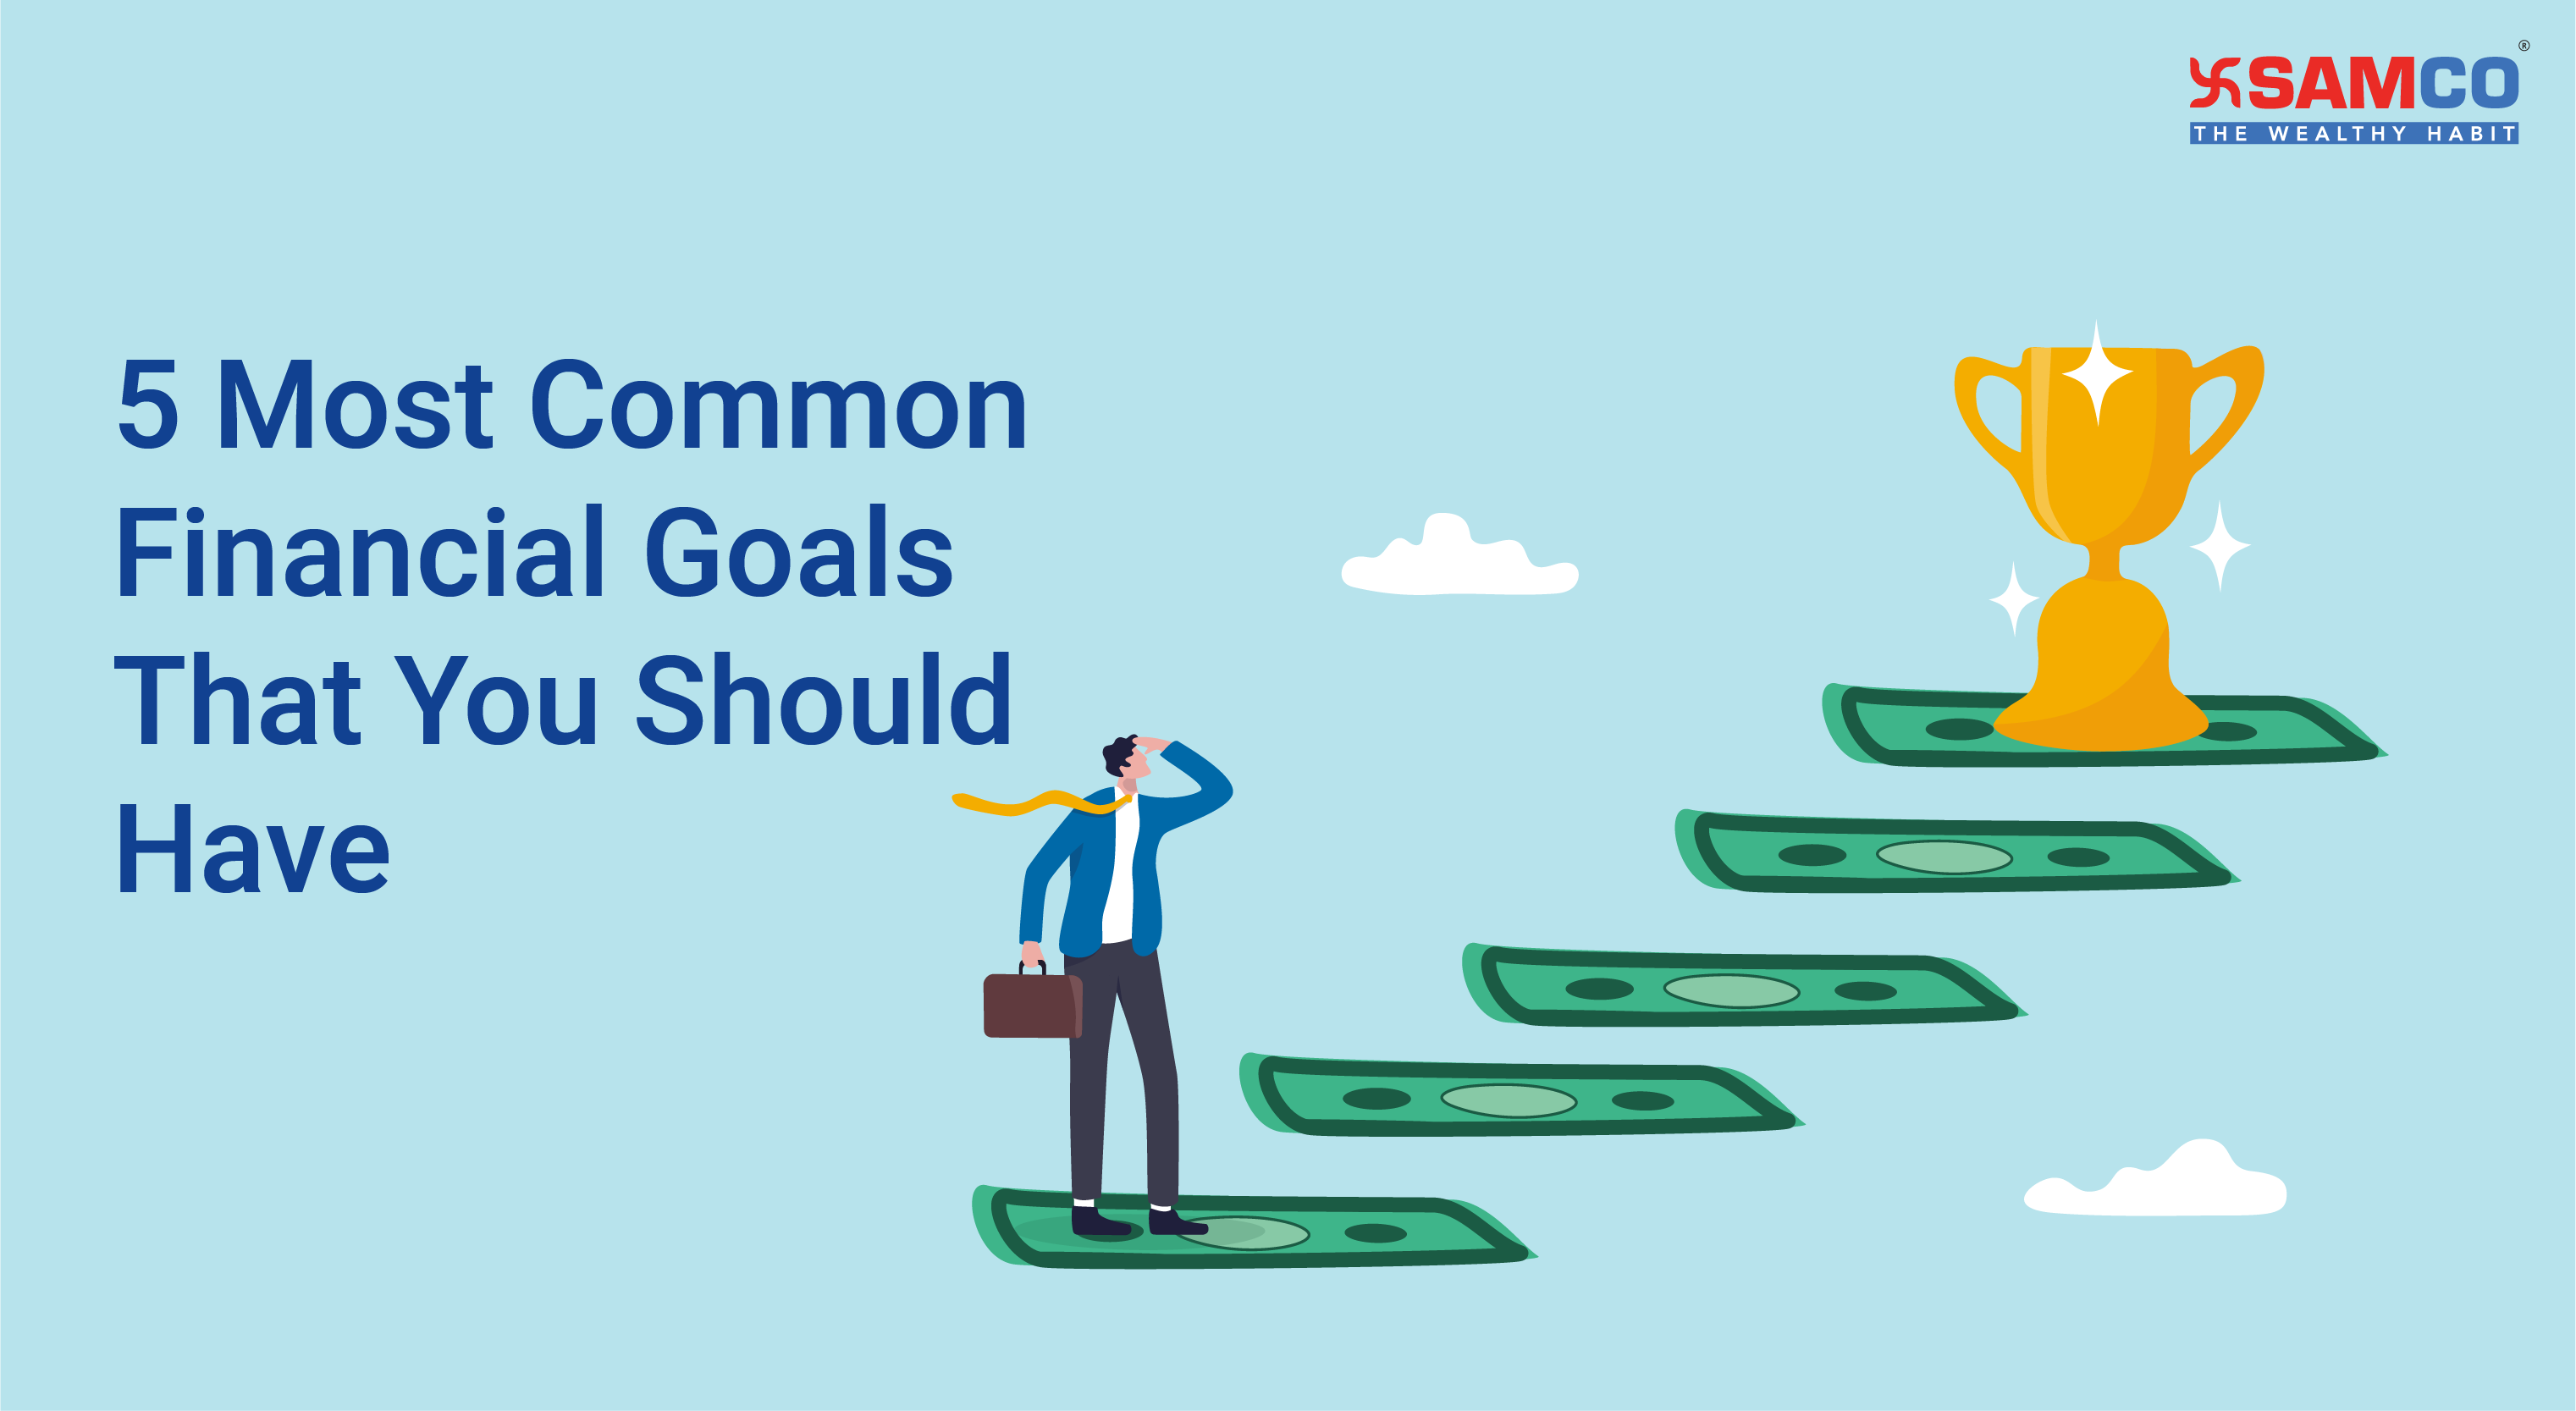 5 Most Common Financial Goals